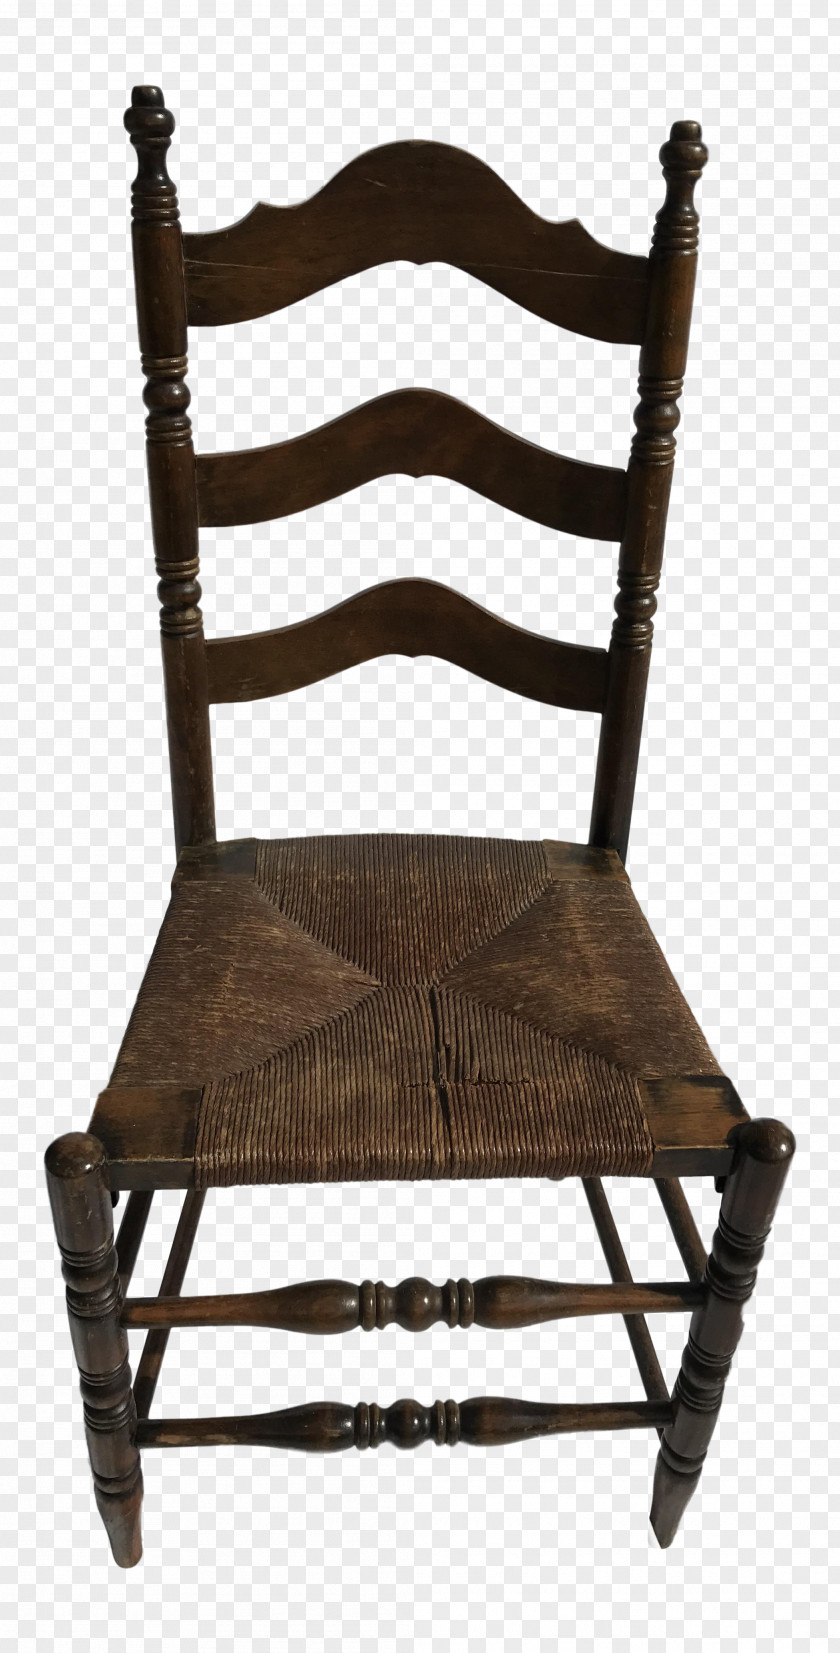 Ladder Furniture Chair Wood PNG